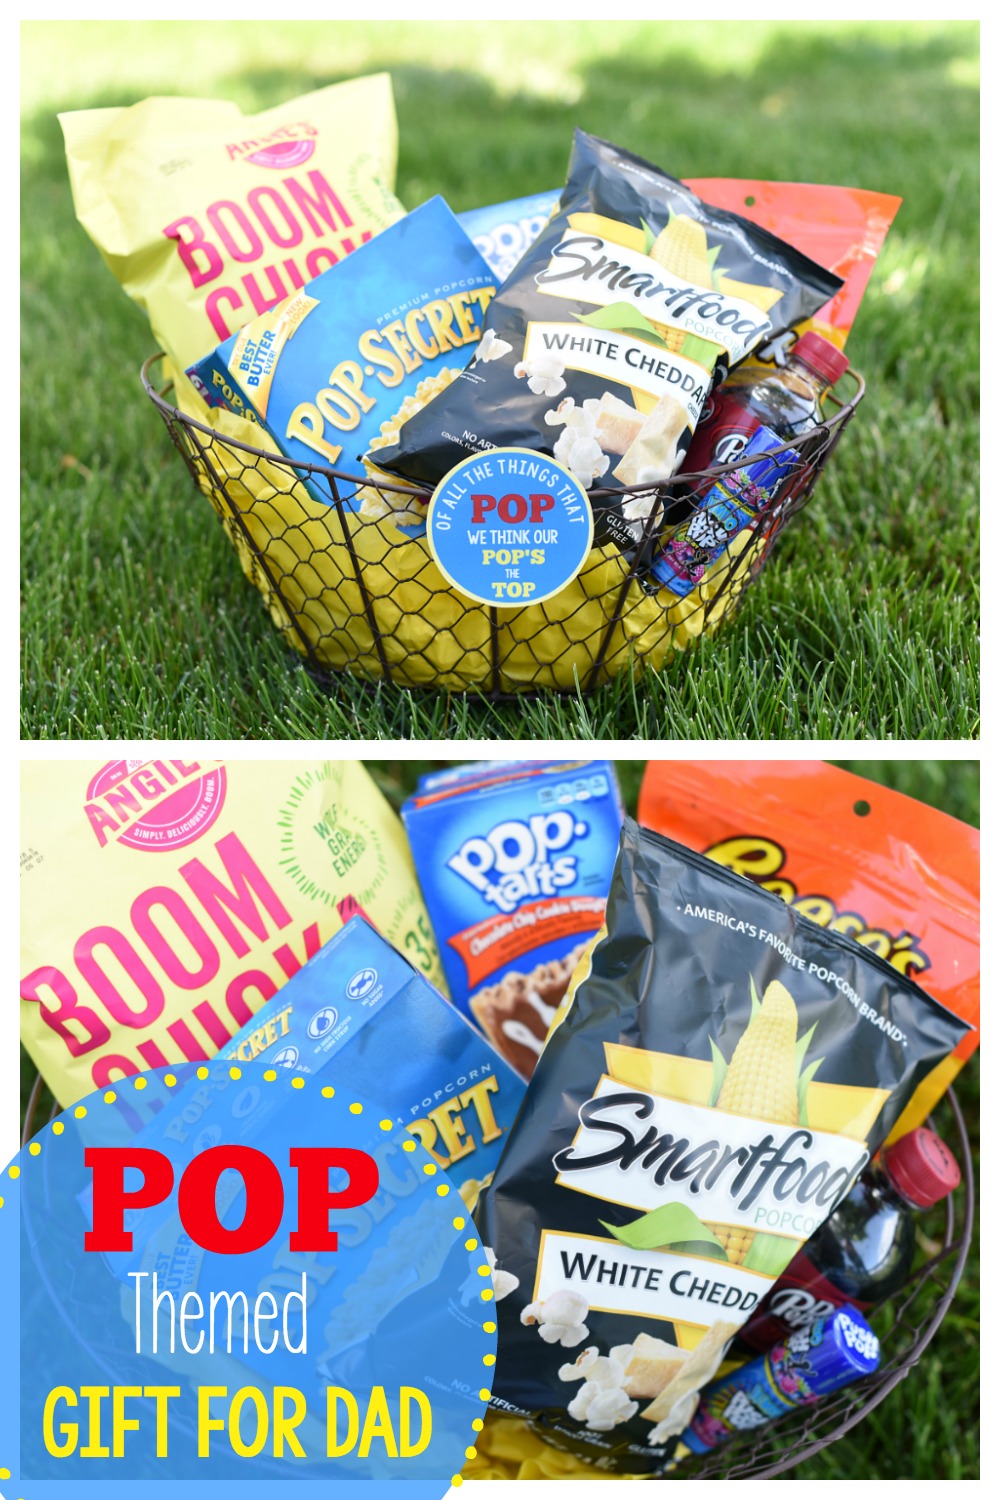 DIY Father's Day Basket Ideas-Fill a basket with all things POP for a cute pop themed Father's Day gift basket for Dad. So easy to make and fun to give! #fathersday #giftsfordad #dadgifts #fathersdaygift #fathersdaygifts